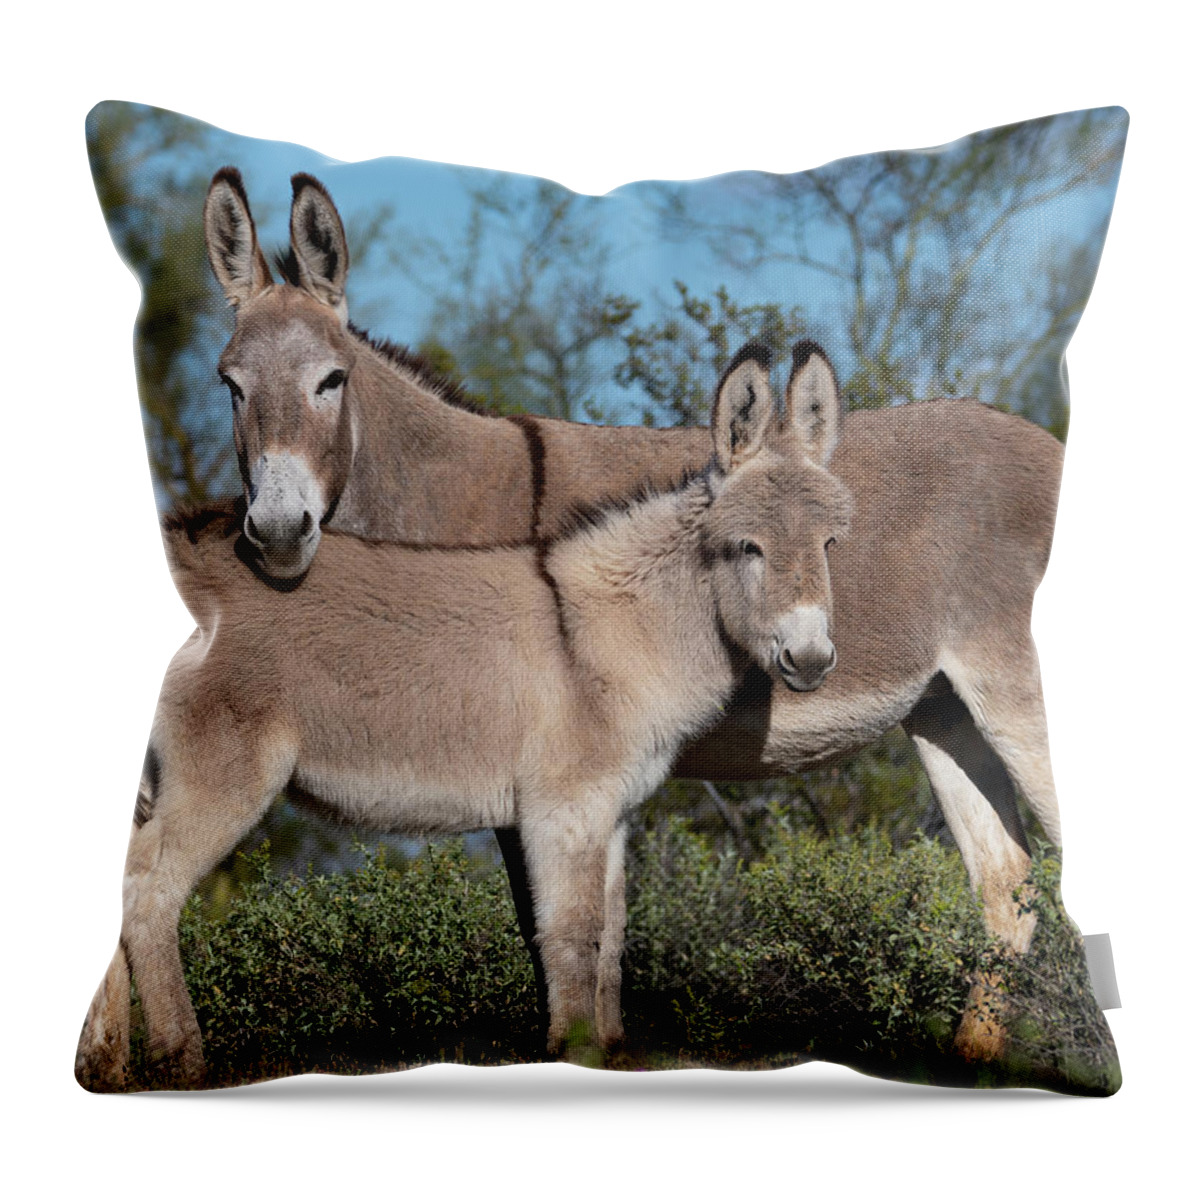 Wild Burros Throw Pillow featuring the photograph Like Mom by Mary Hone